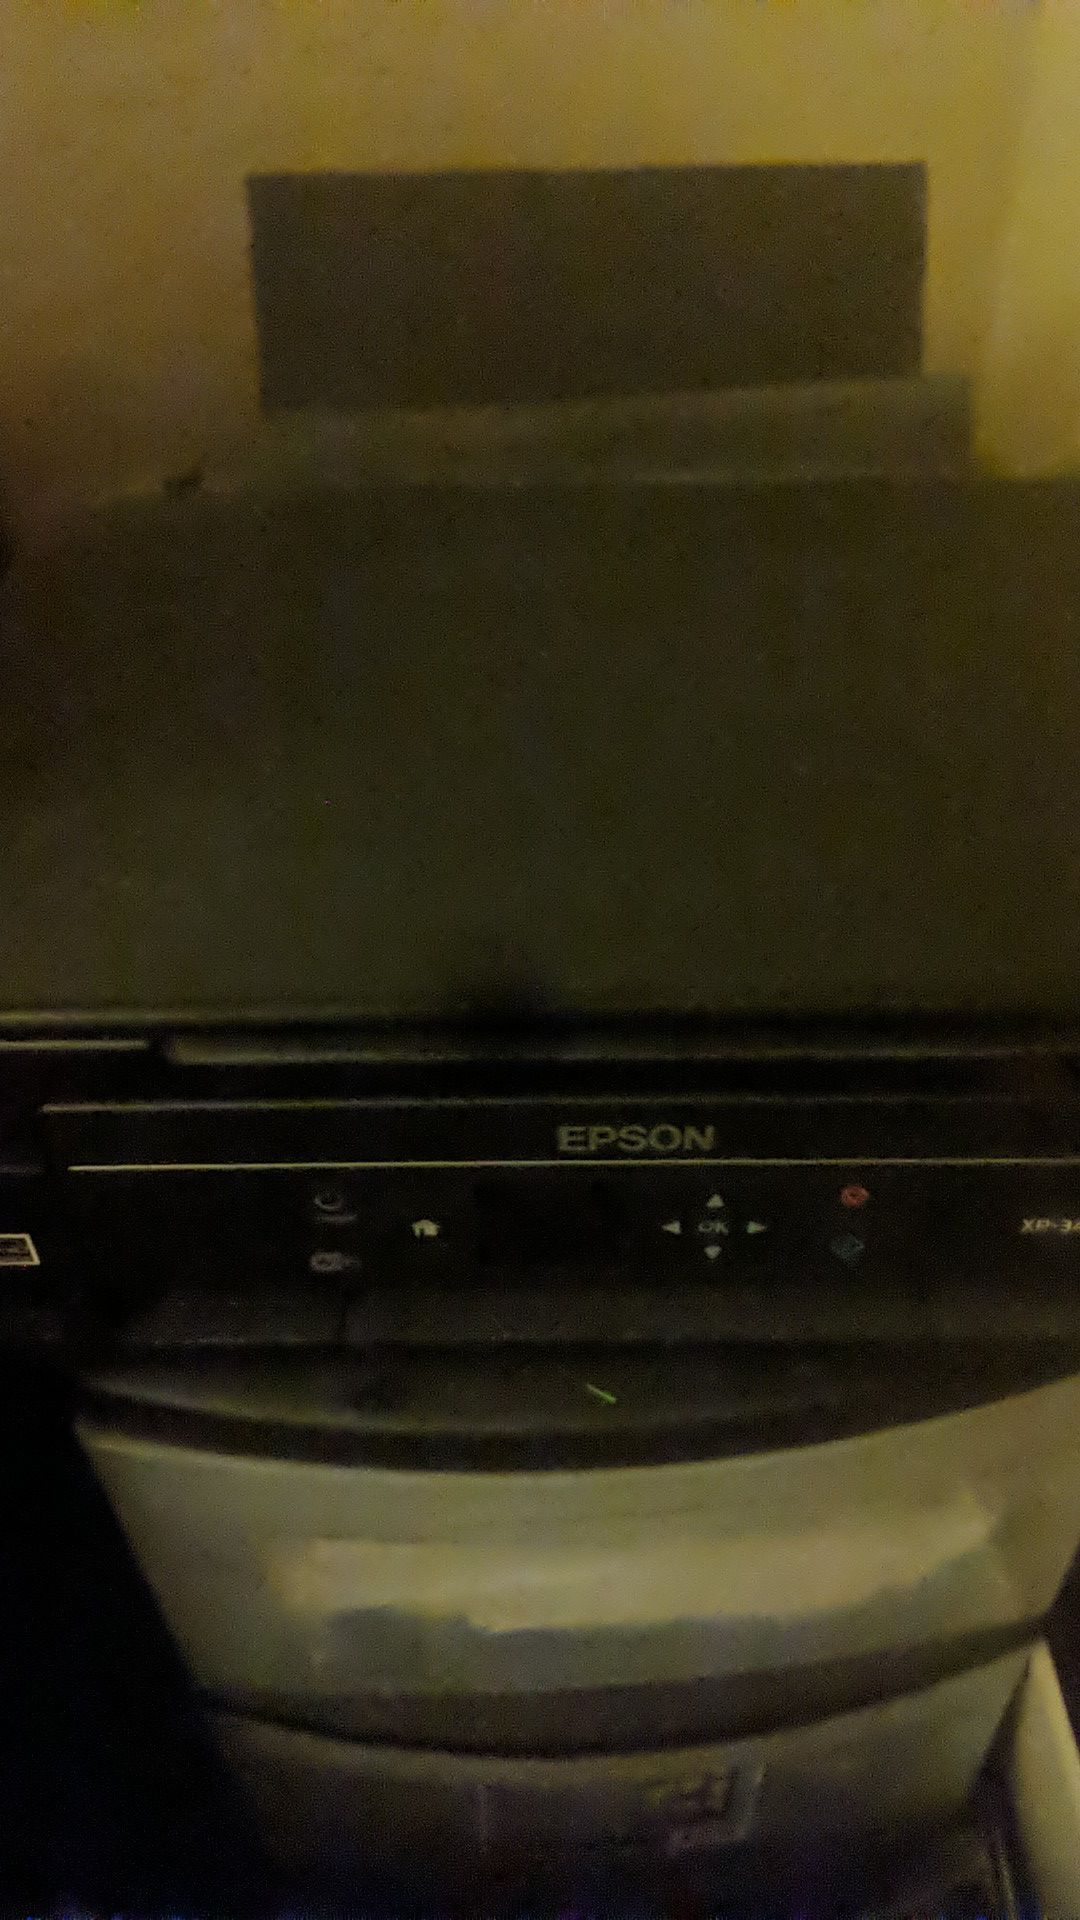 Epson xp340 all in one wireless printer